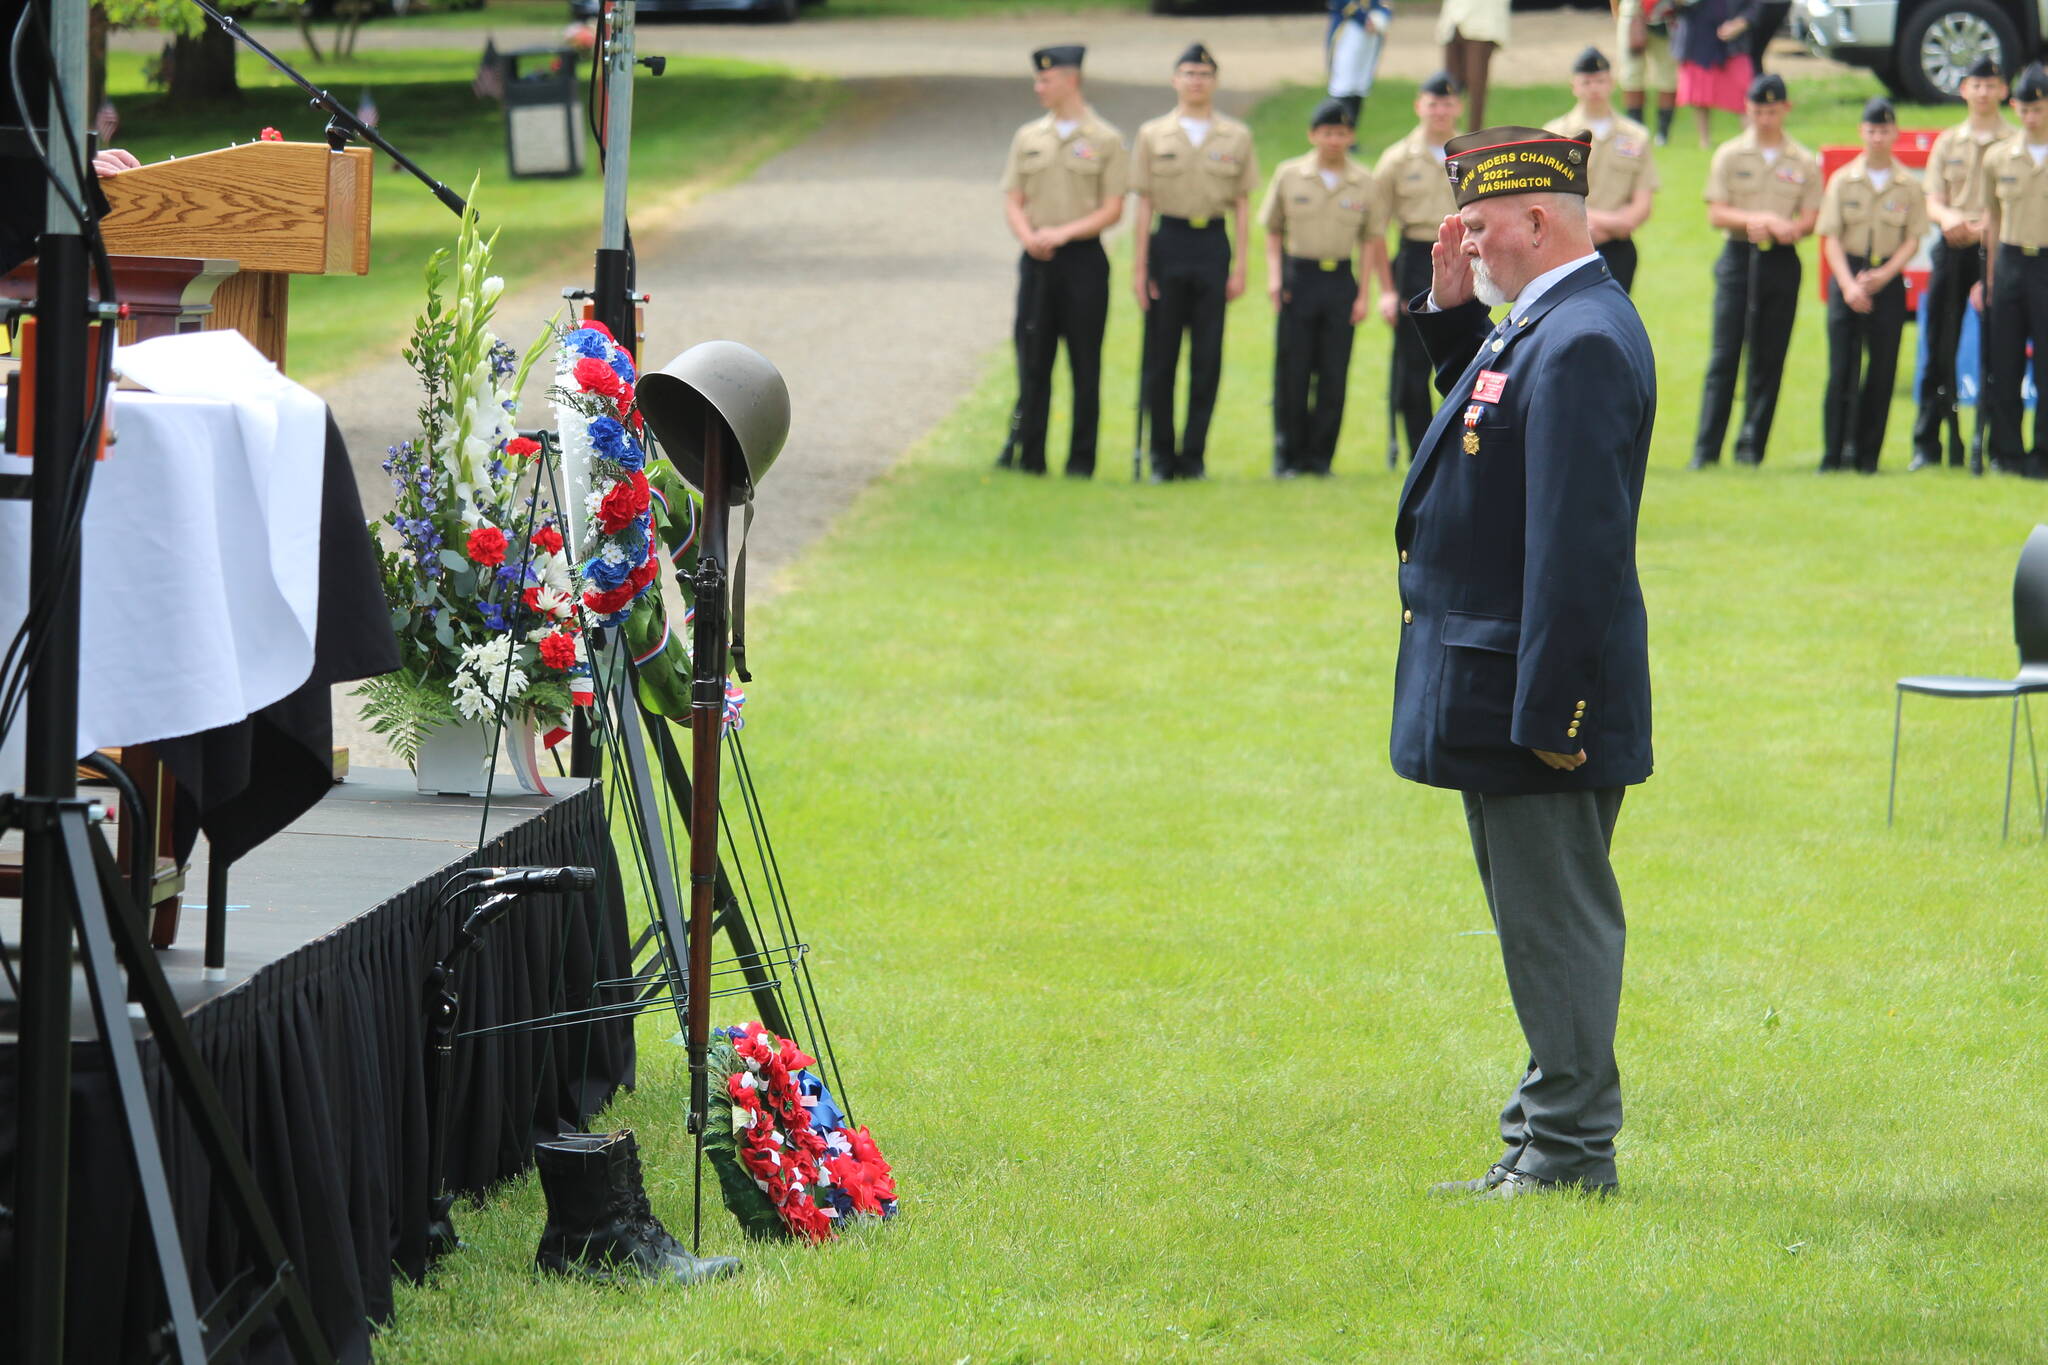 Photo by Karina Andrew/Whidbey News-Times
The VFW held a traditional wreath-laying ceremony as part of the Service of Remembrance at Maple Leaf Cemetery on Memorial Day.